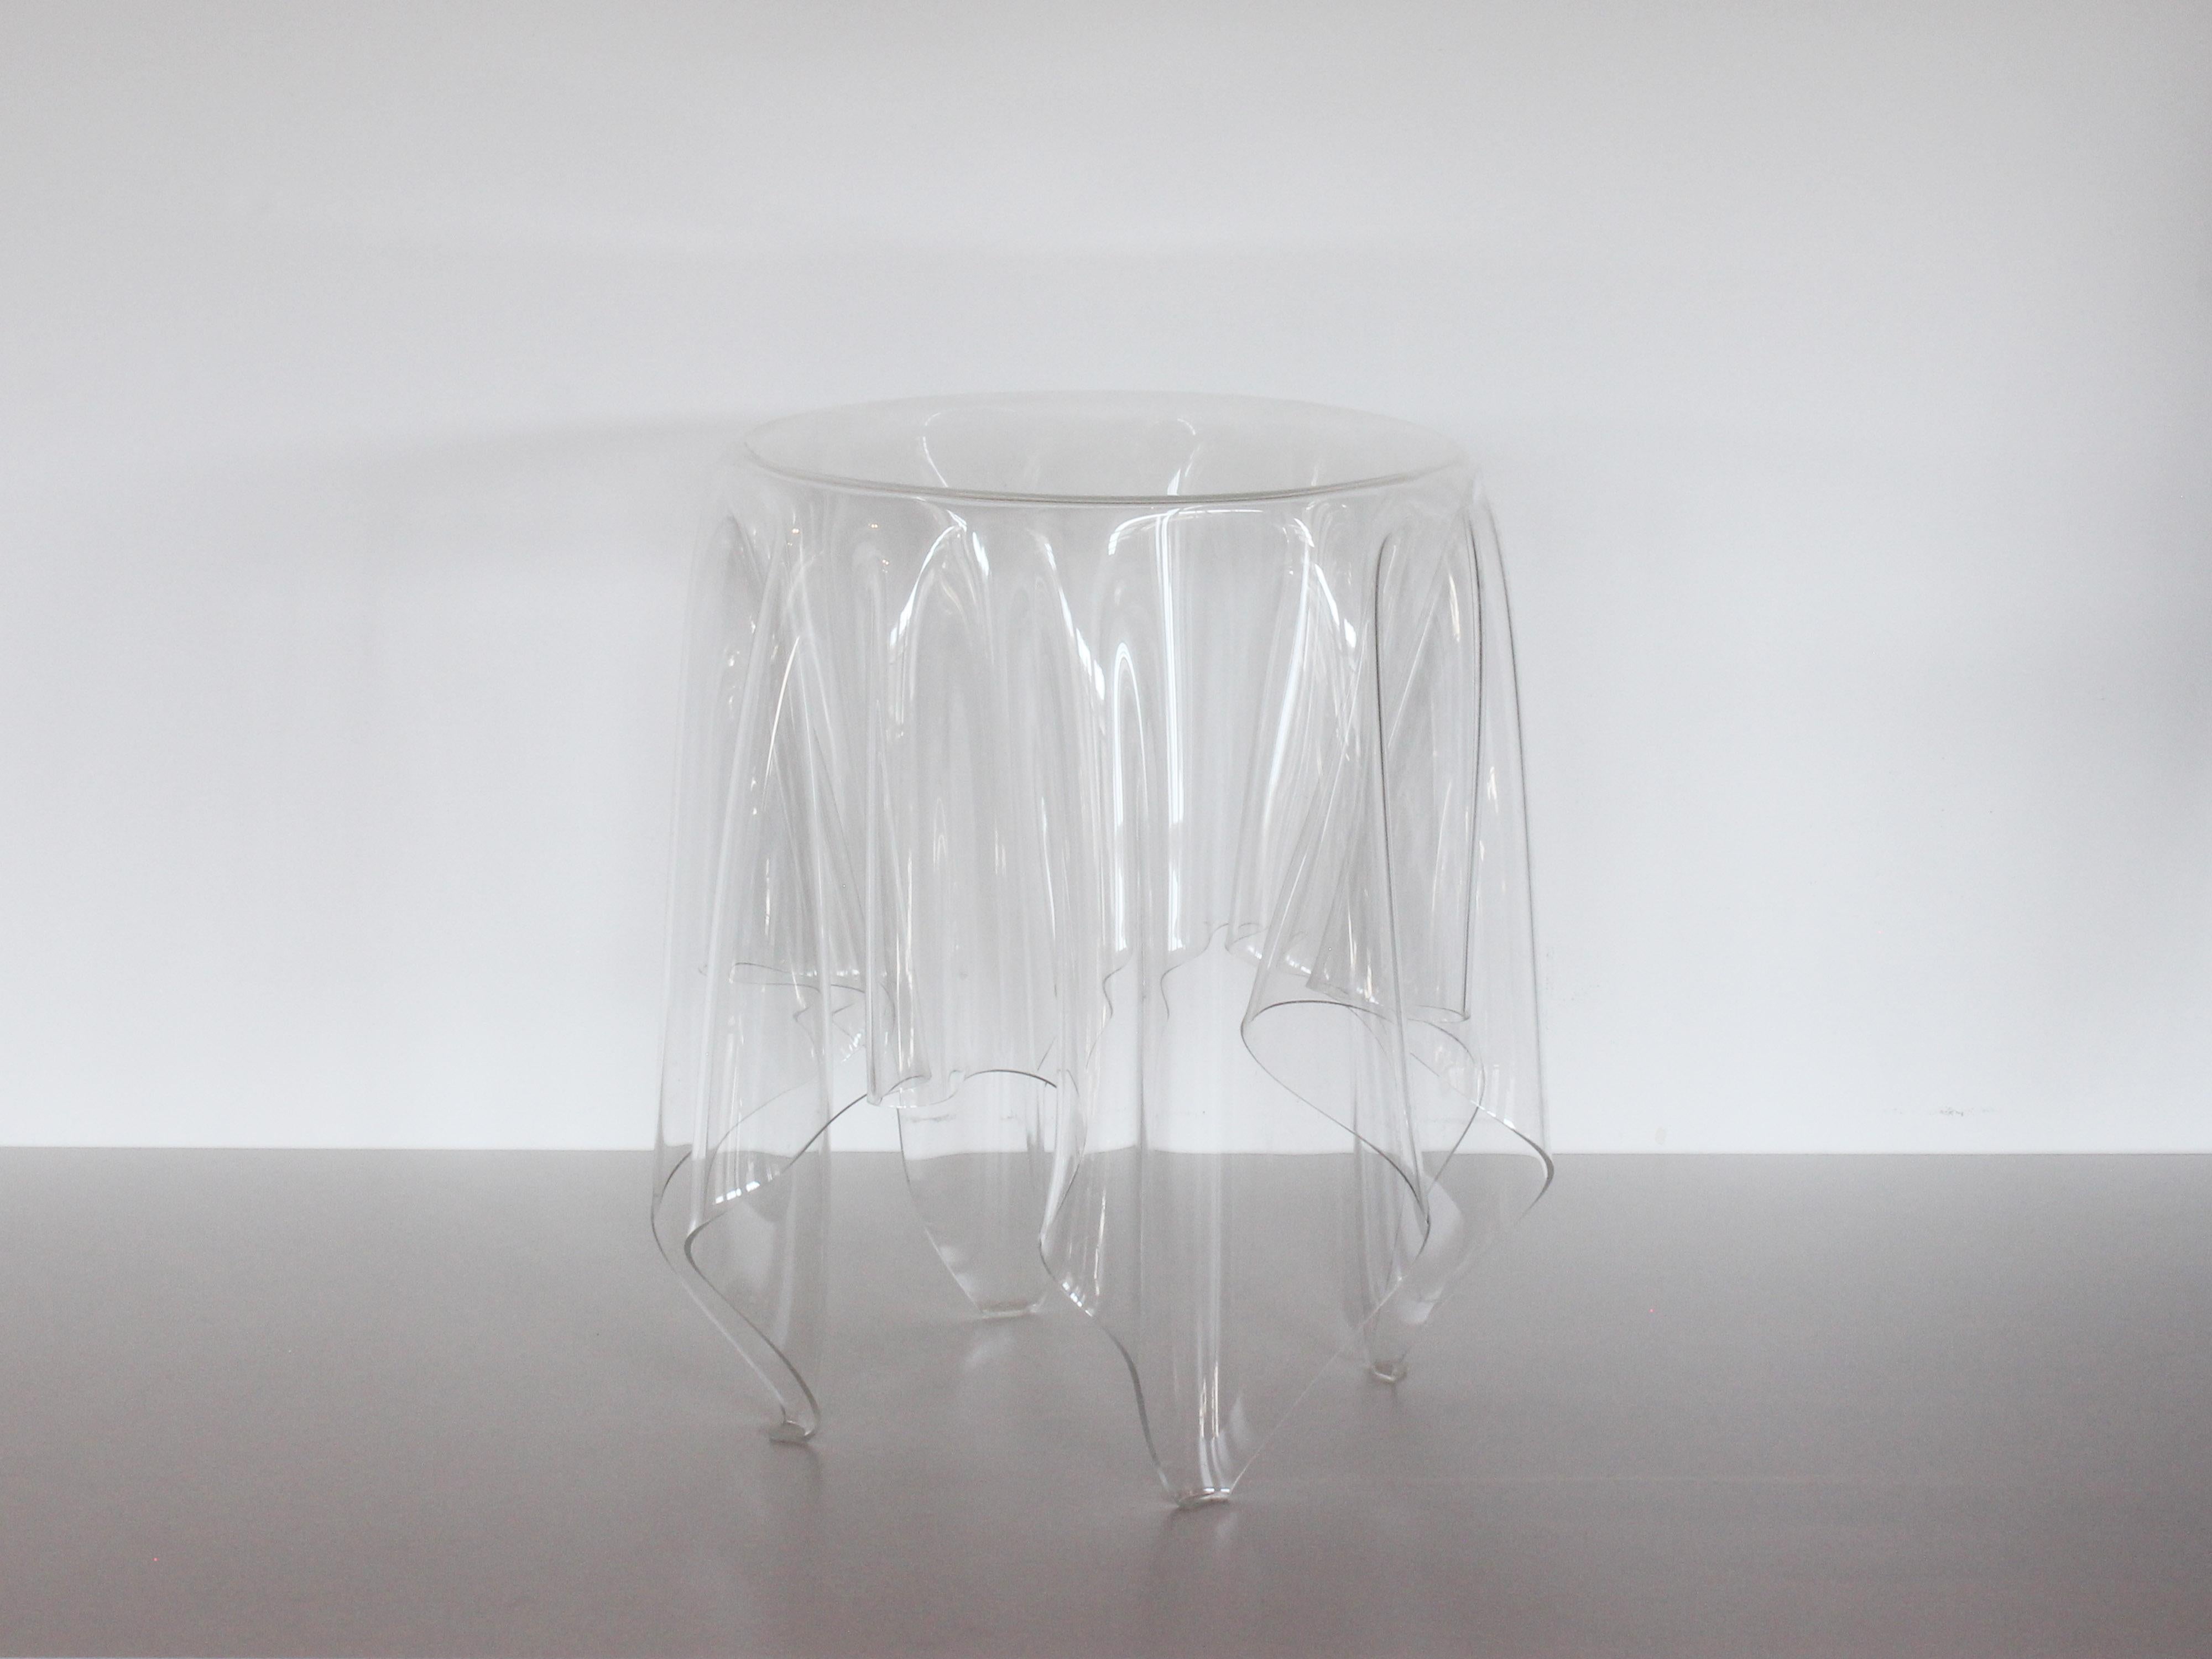 Handmade Illusion side table, designed by John Brauer for Essey. Made of clear acrylic (3 mm Acryl / PMMA), the invisible object gives the impression of a tablecloth floating in the air. 

